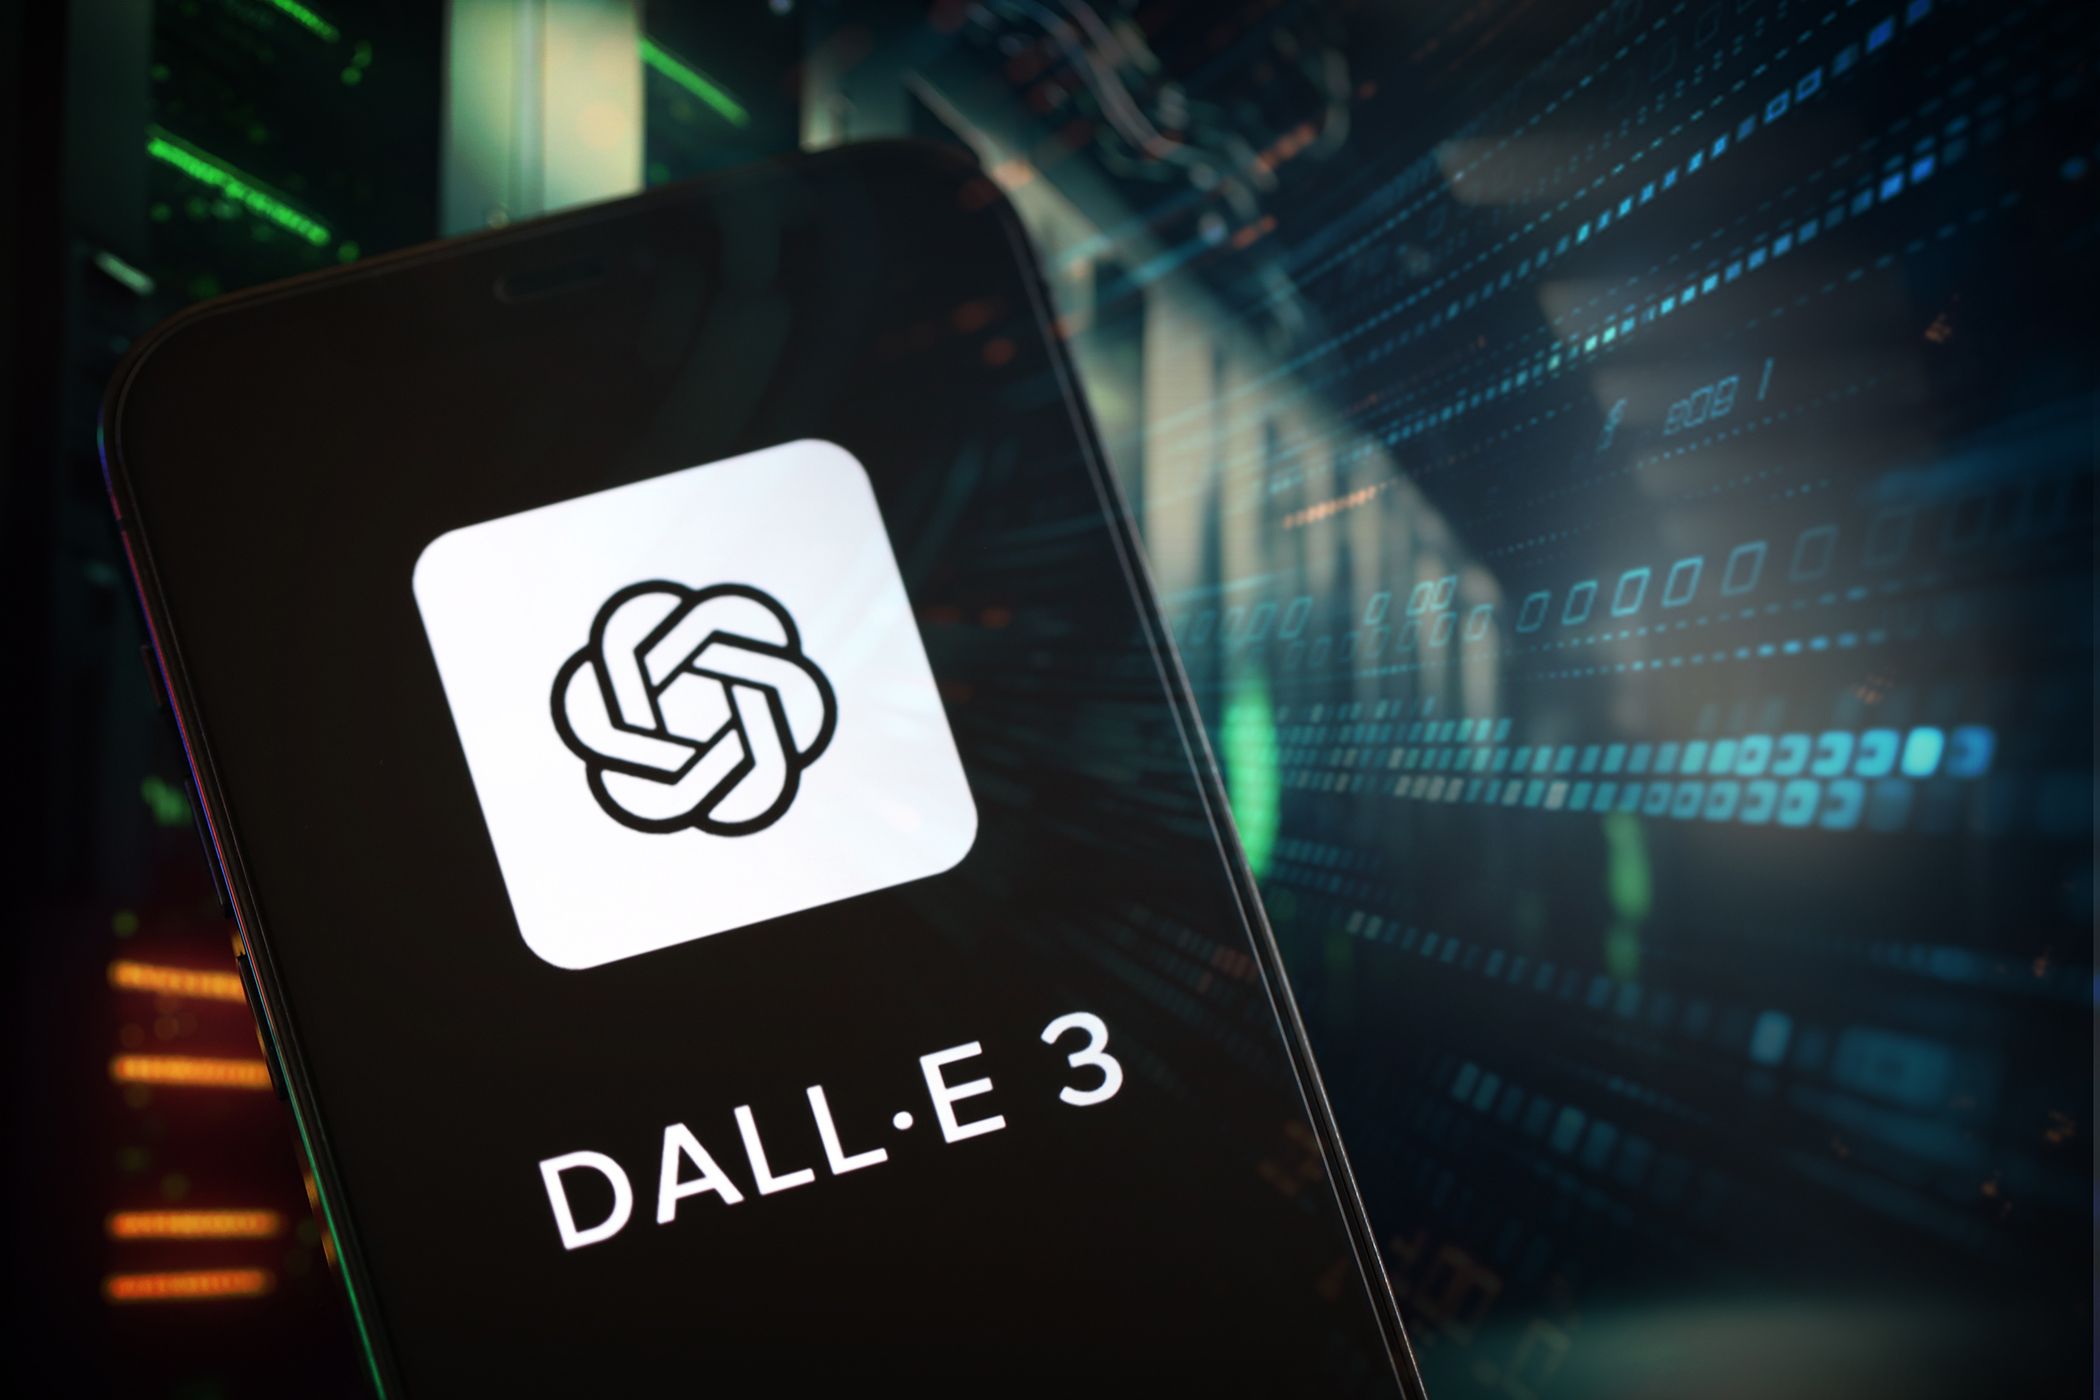 Smartphone displaying the DALL-E 3 logo, set against a background of data servers and digital code, symbolizing AI technology.